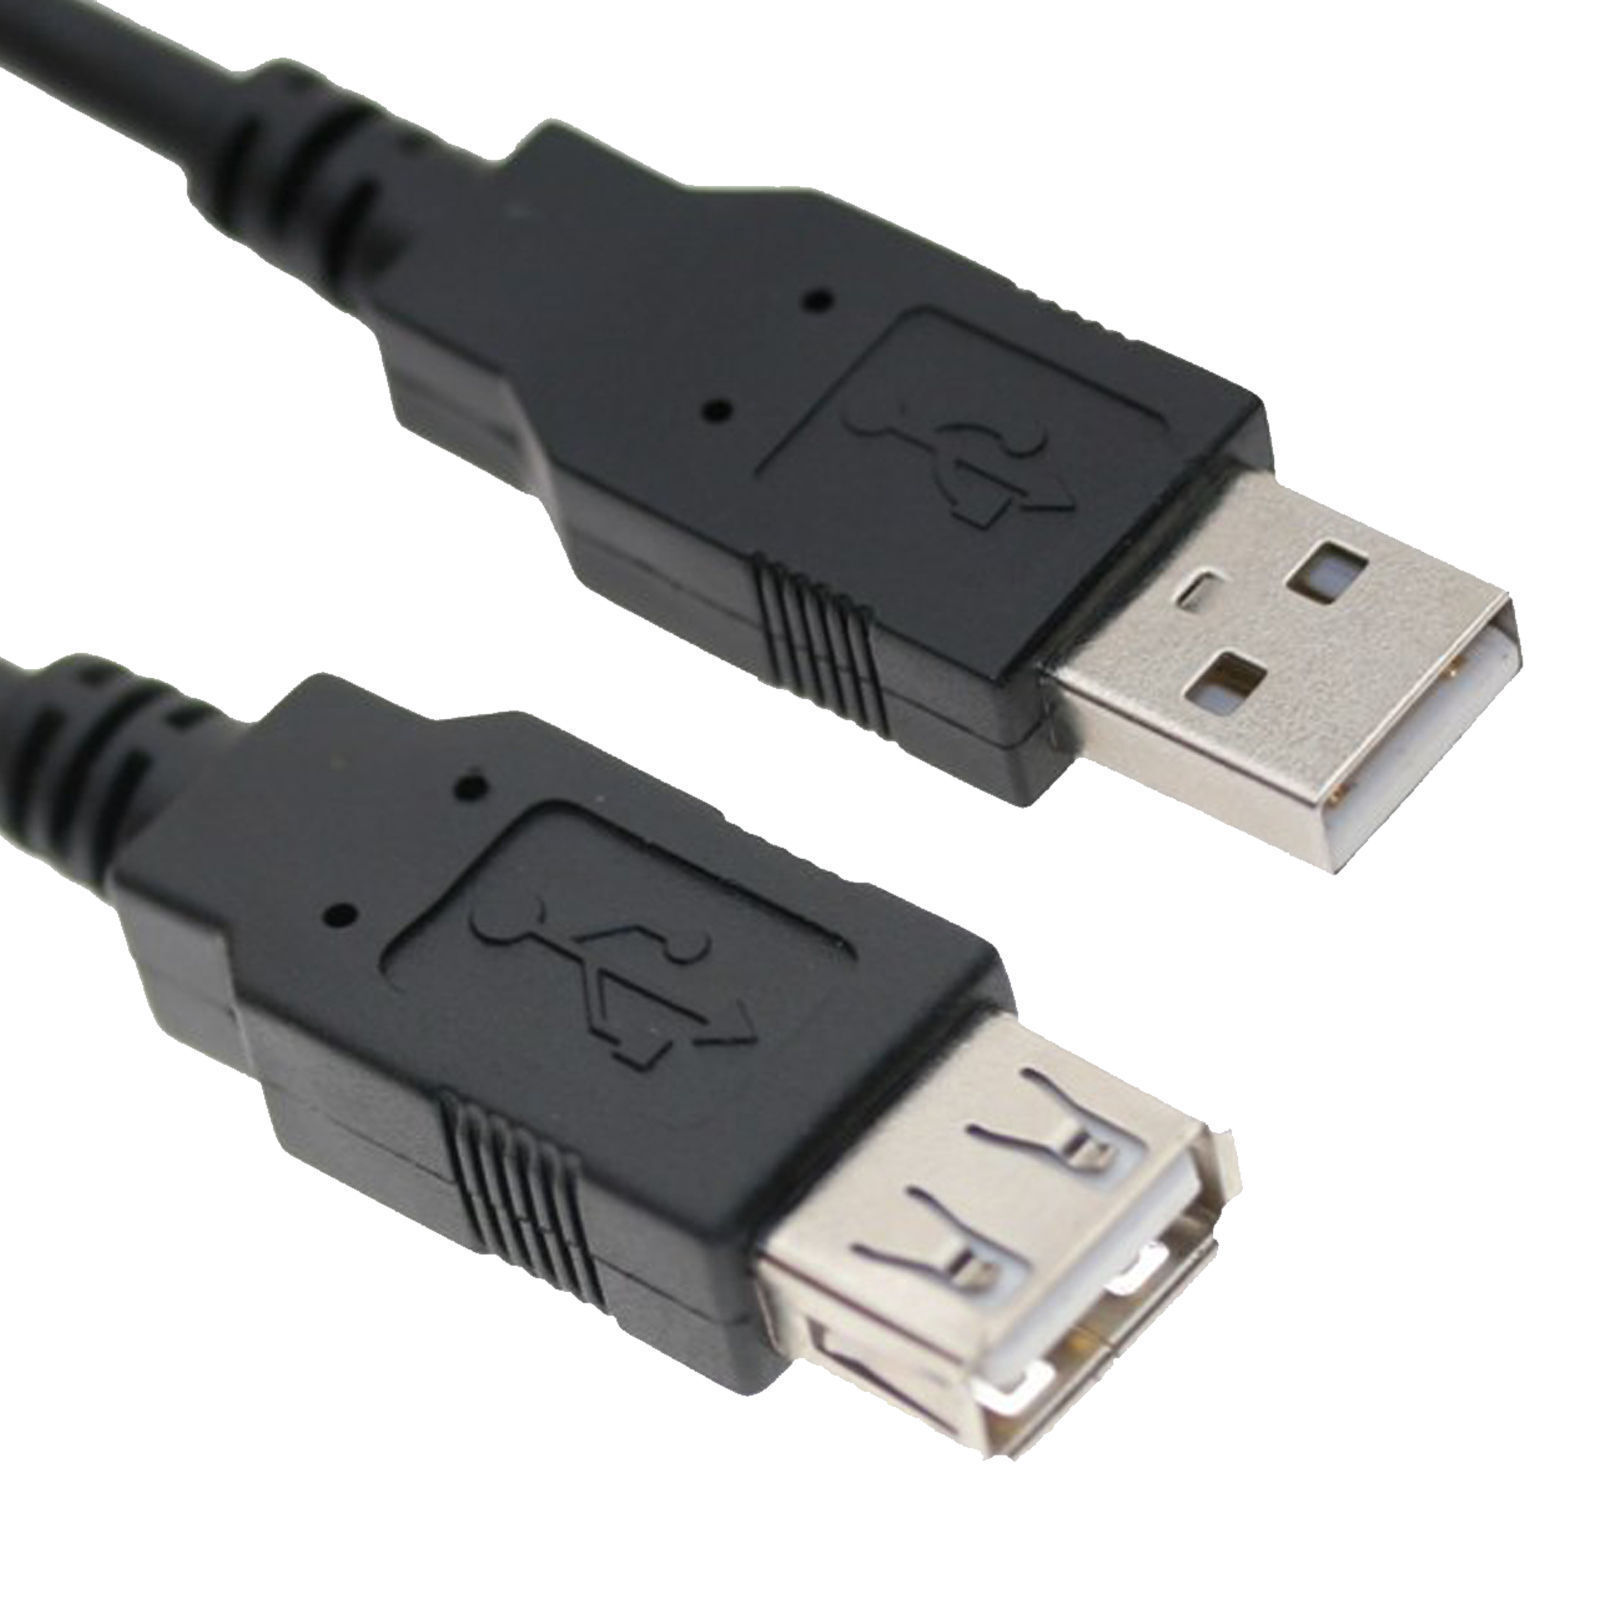 5M Meter High Speed USB 2.0 Extender EXTENSION Cable Short Male Female Lead UK